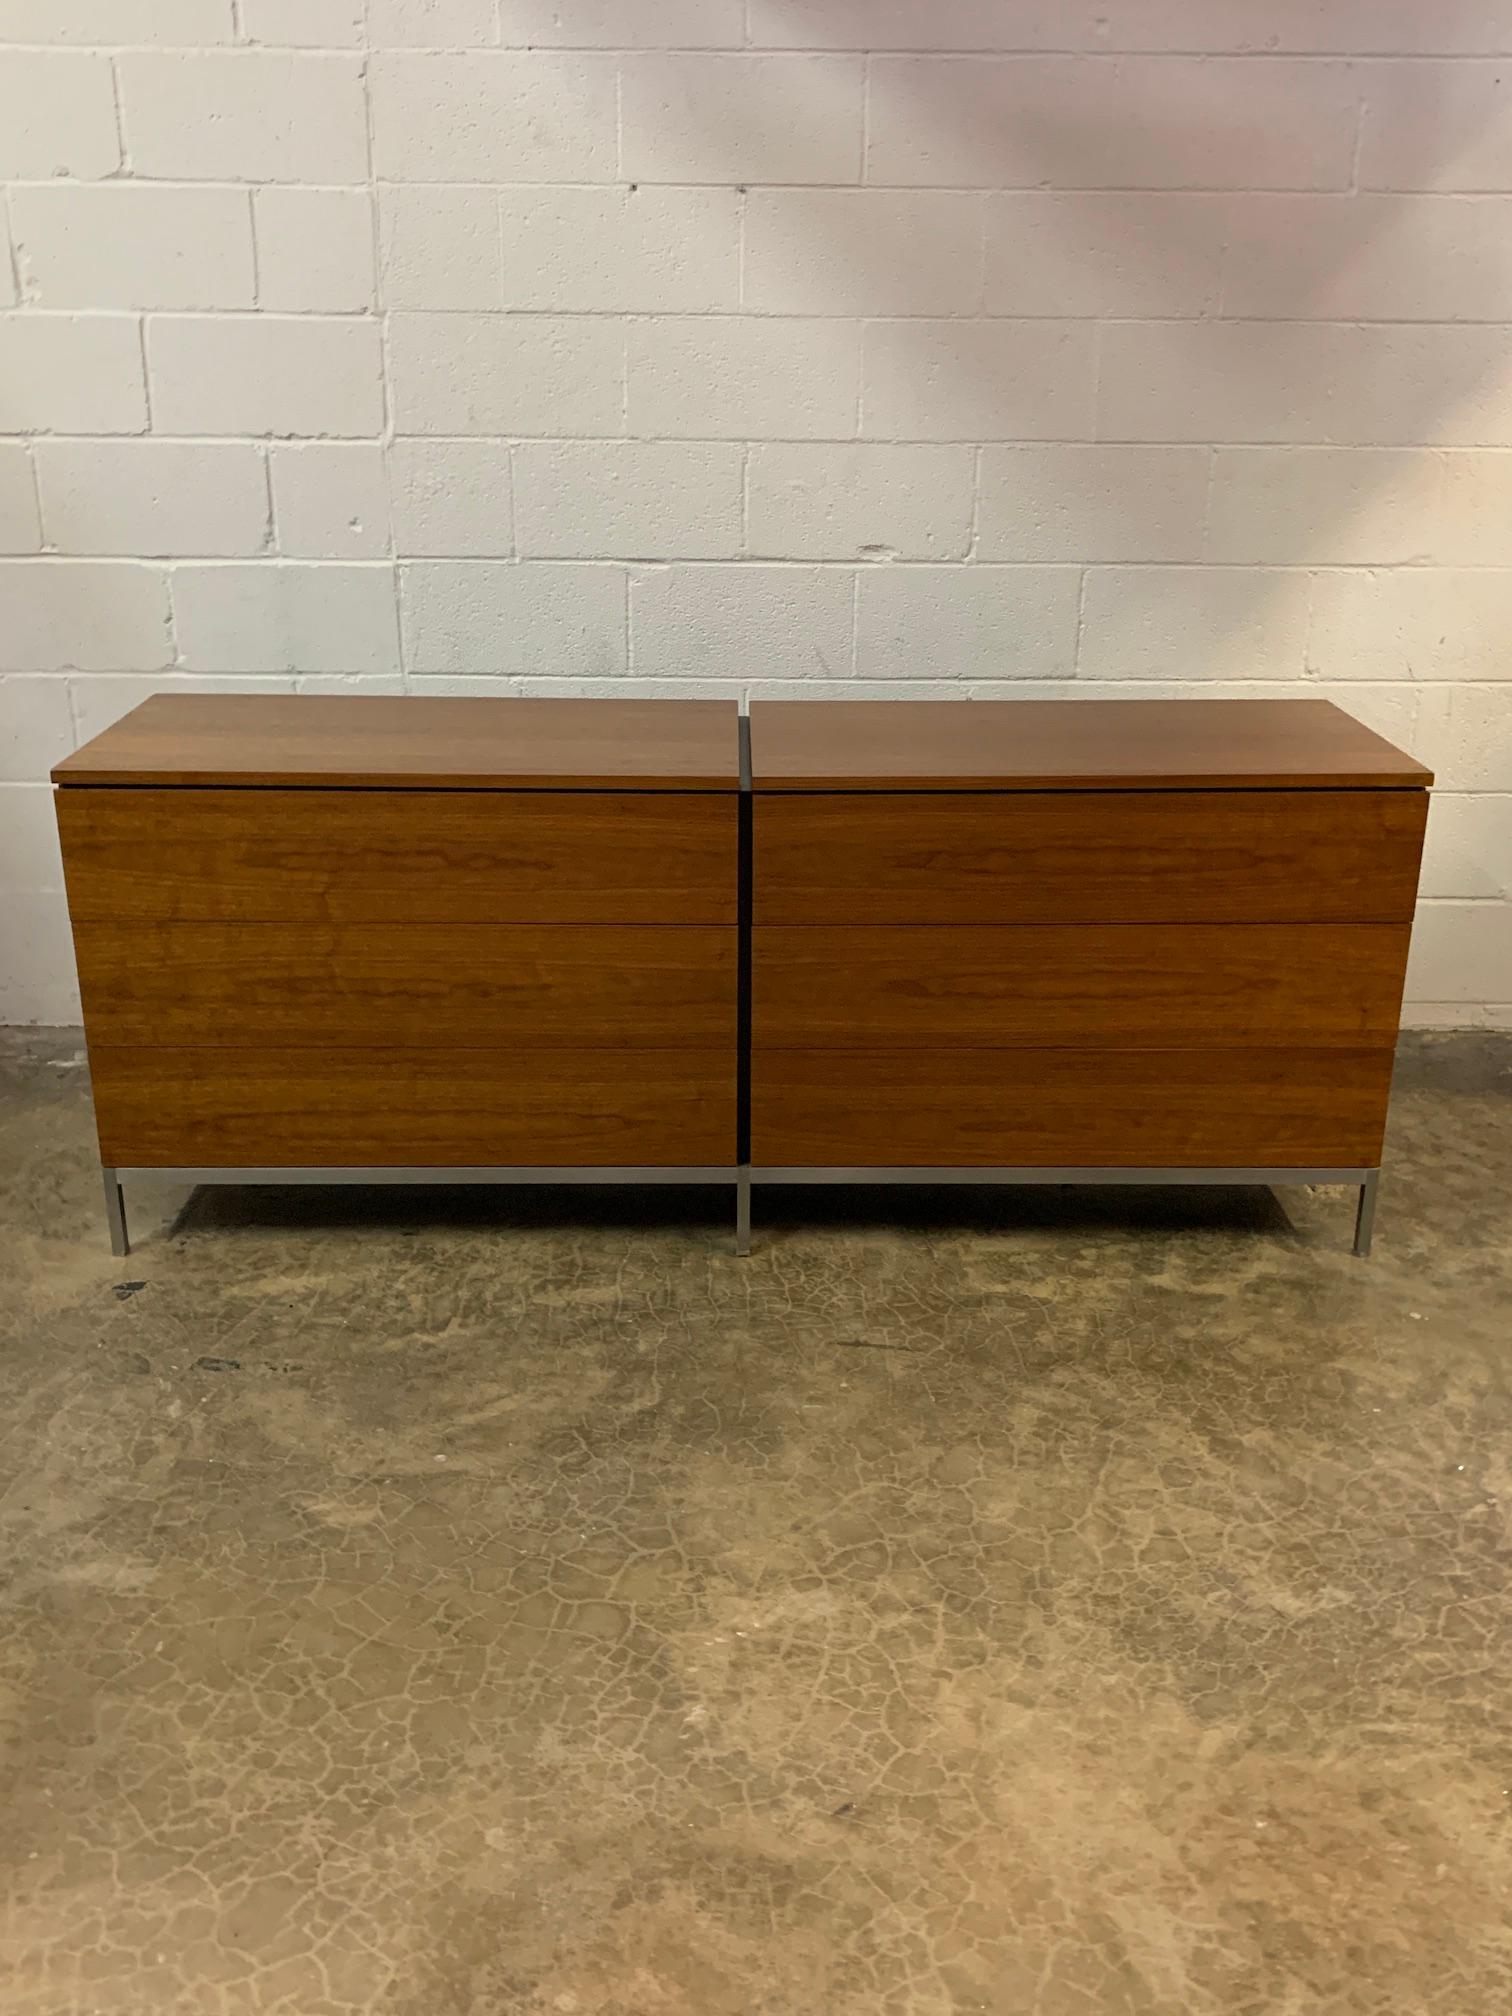 A matching pair of early walnut dressers on brushed nickel frames designed by Florence Knoll for Knoll. Each cabinet has six drawers with removable dividers. When placed together you have a 12 ft cabinet.